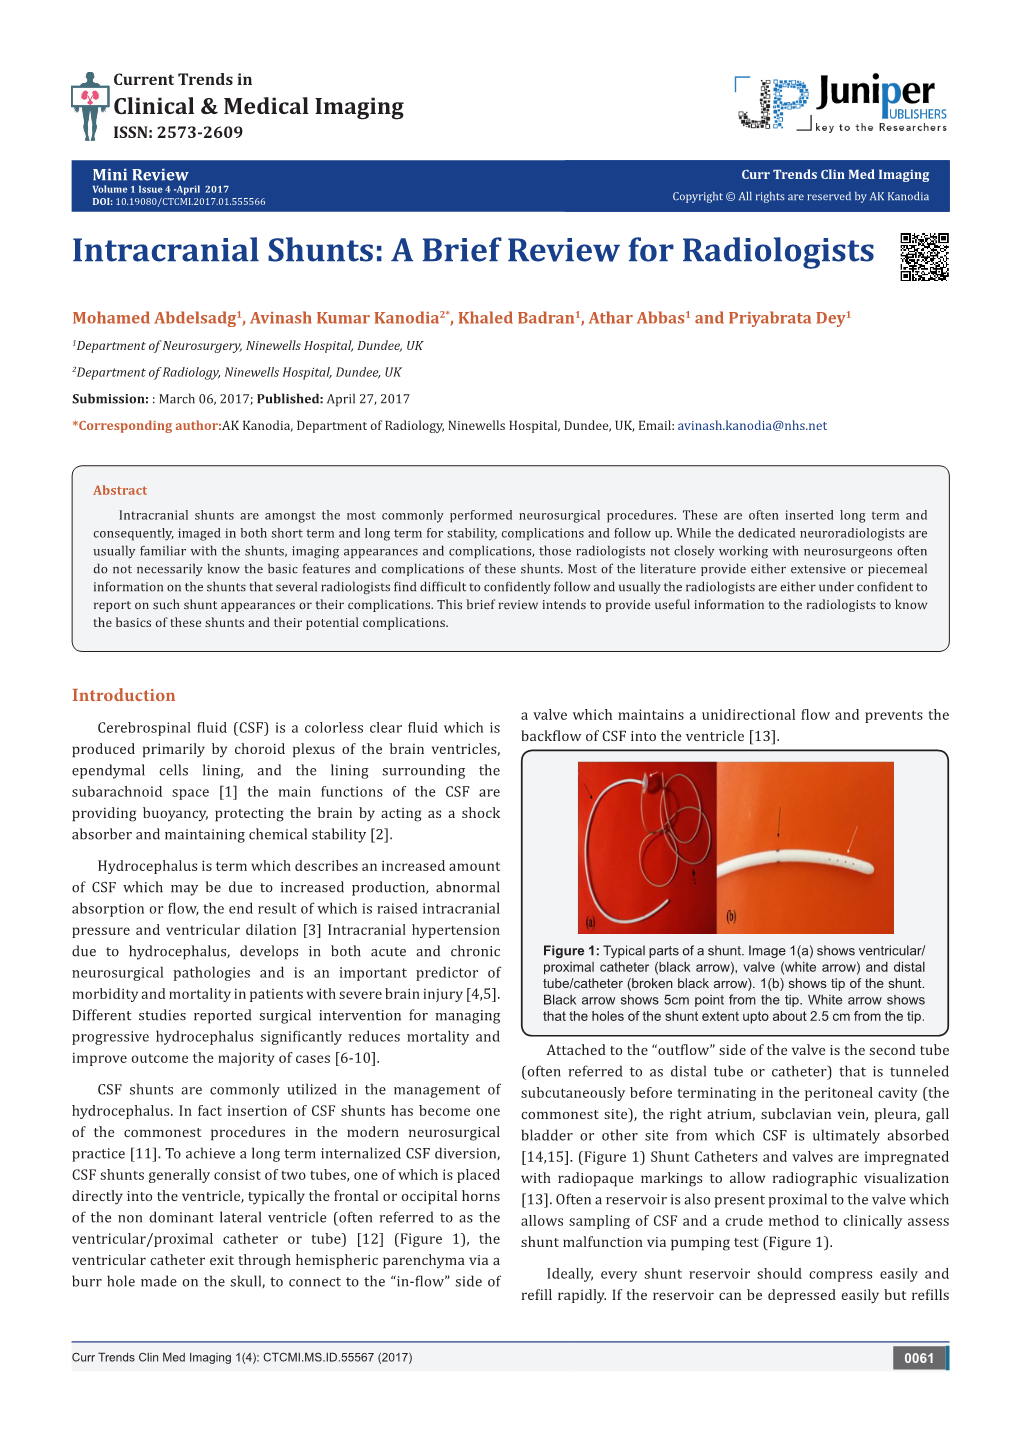 Intracranial Shunts: a Brief Review for Radiologists